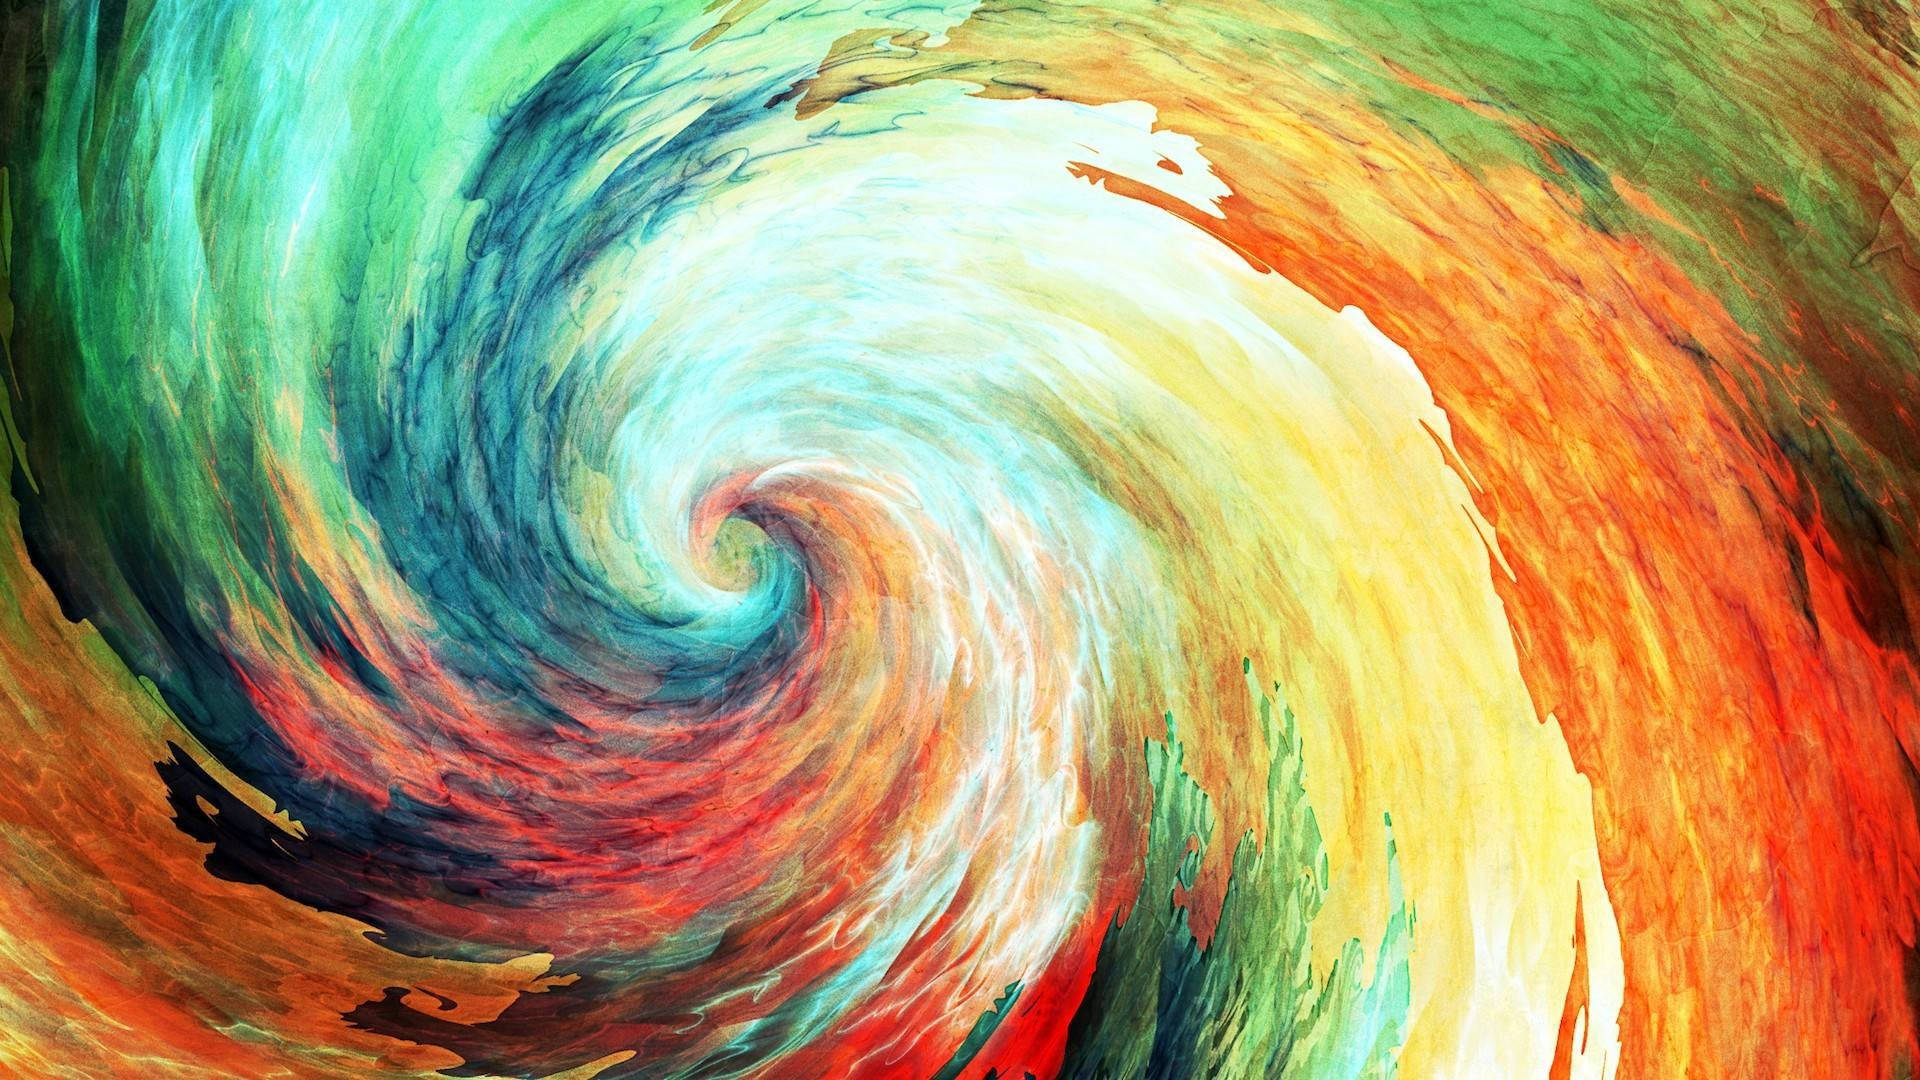 Abstract Swirls Of Color Animated Desktop Background